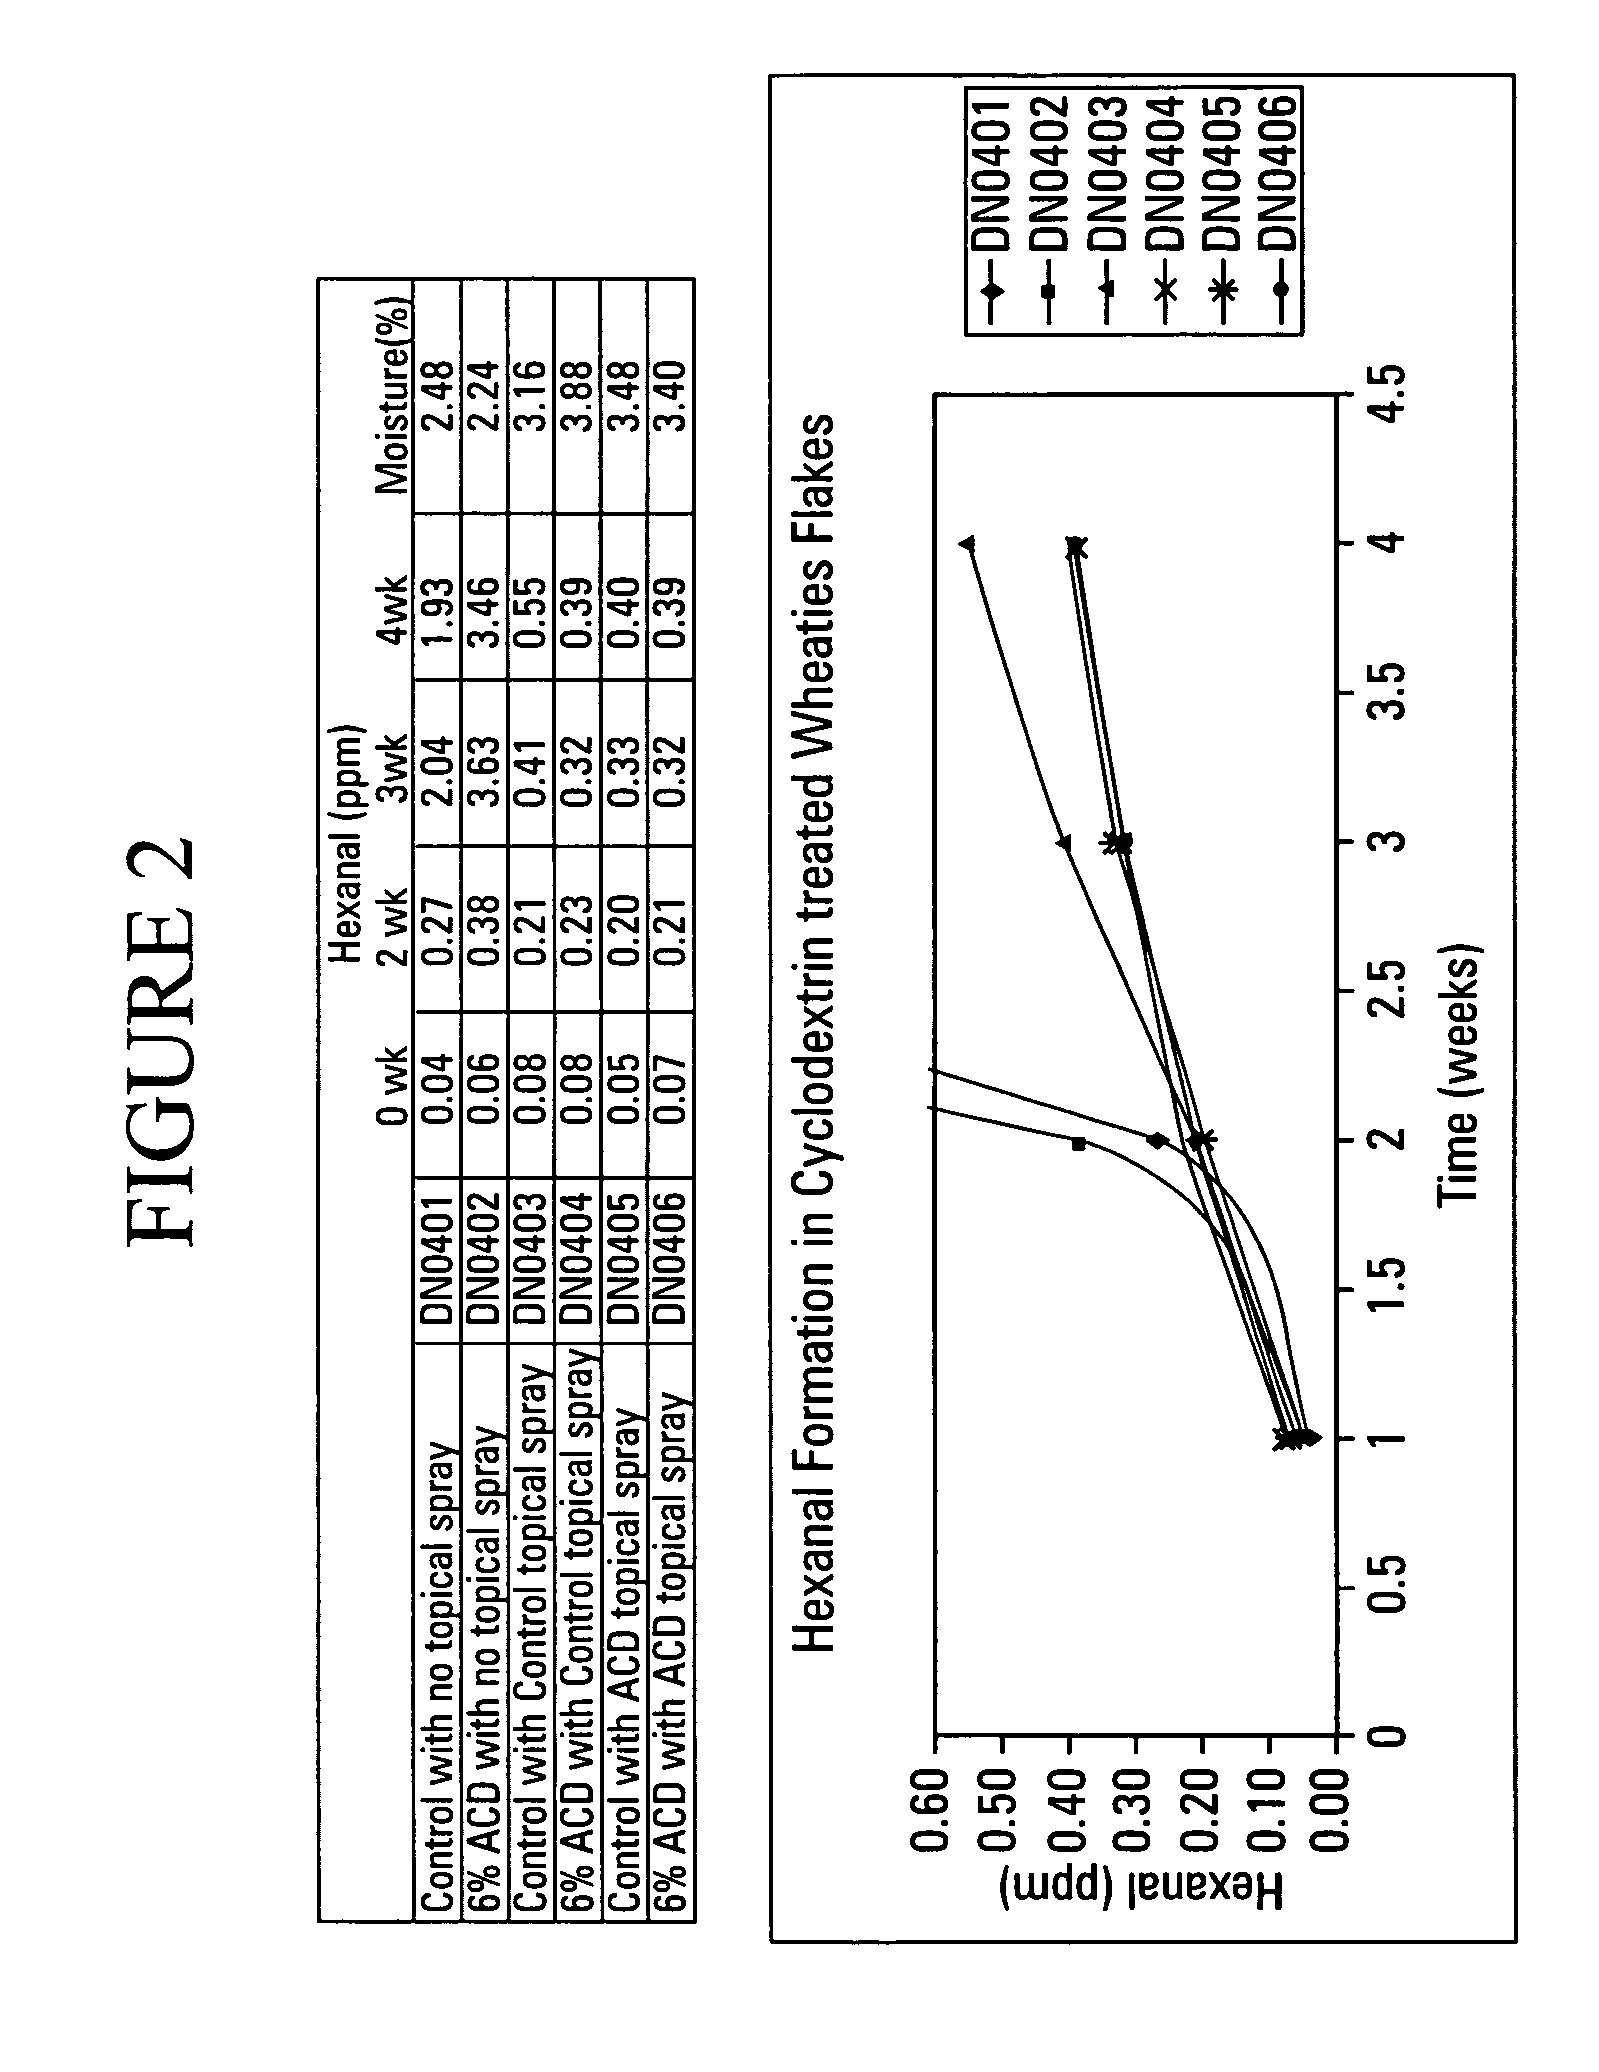 Method for preventing acrylamide formation in food products and food intermediates